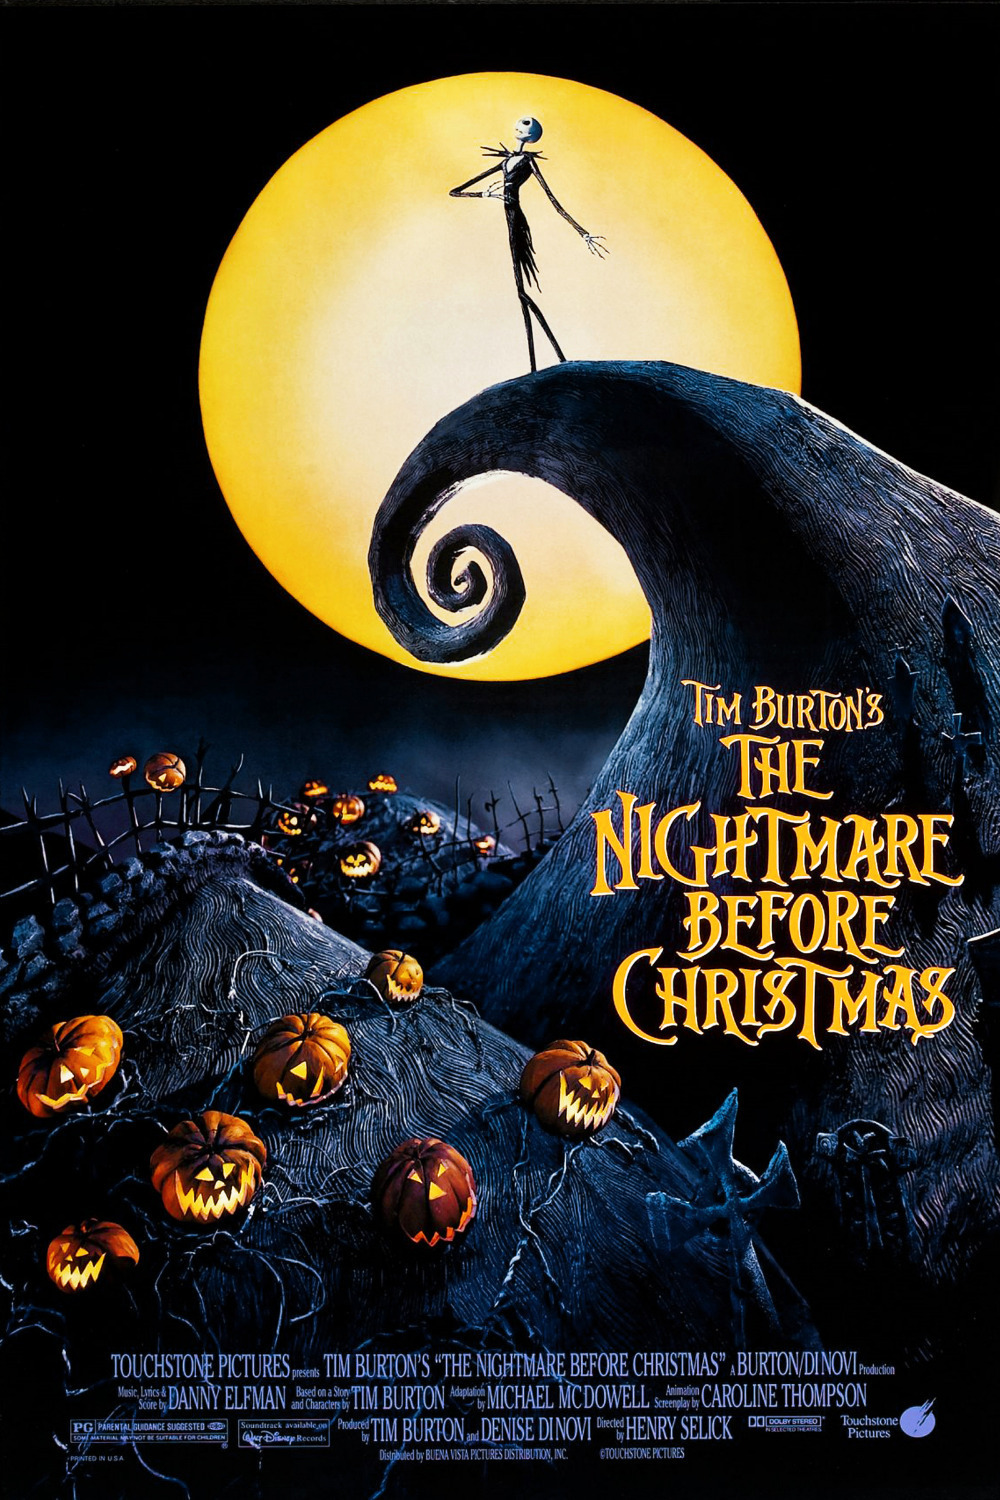 The Nightmare Before Christmas (1993): A Timeless Holiday Classic